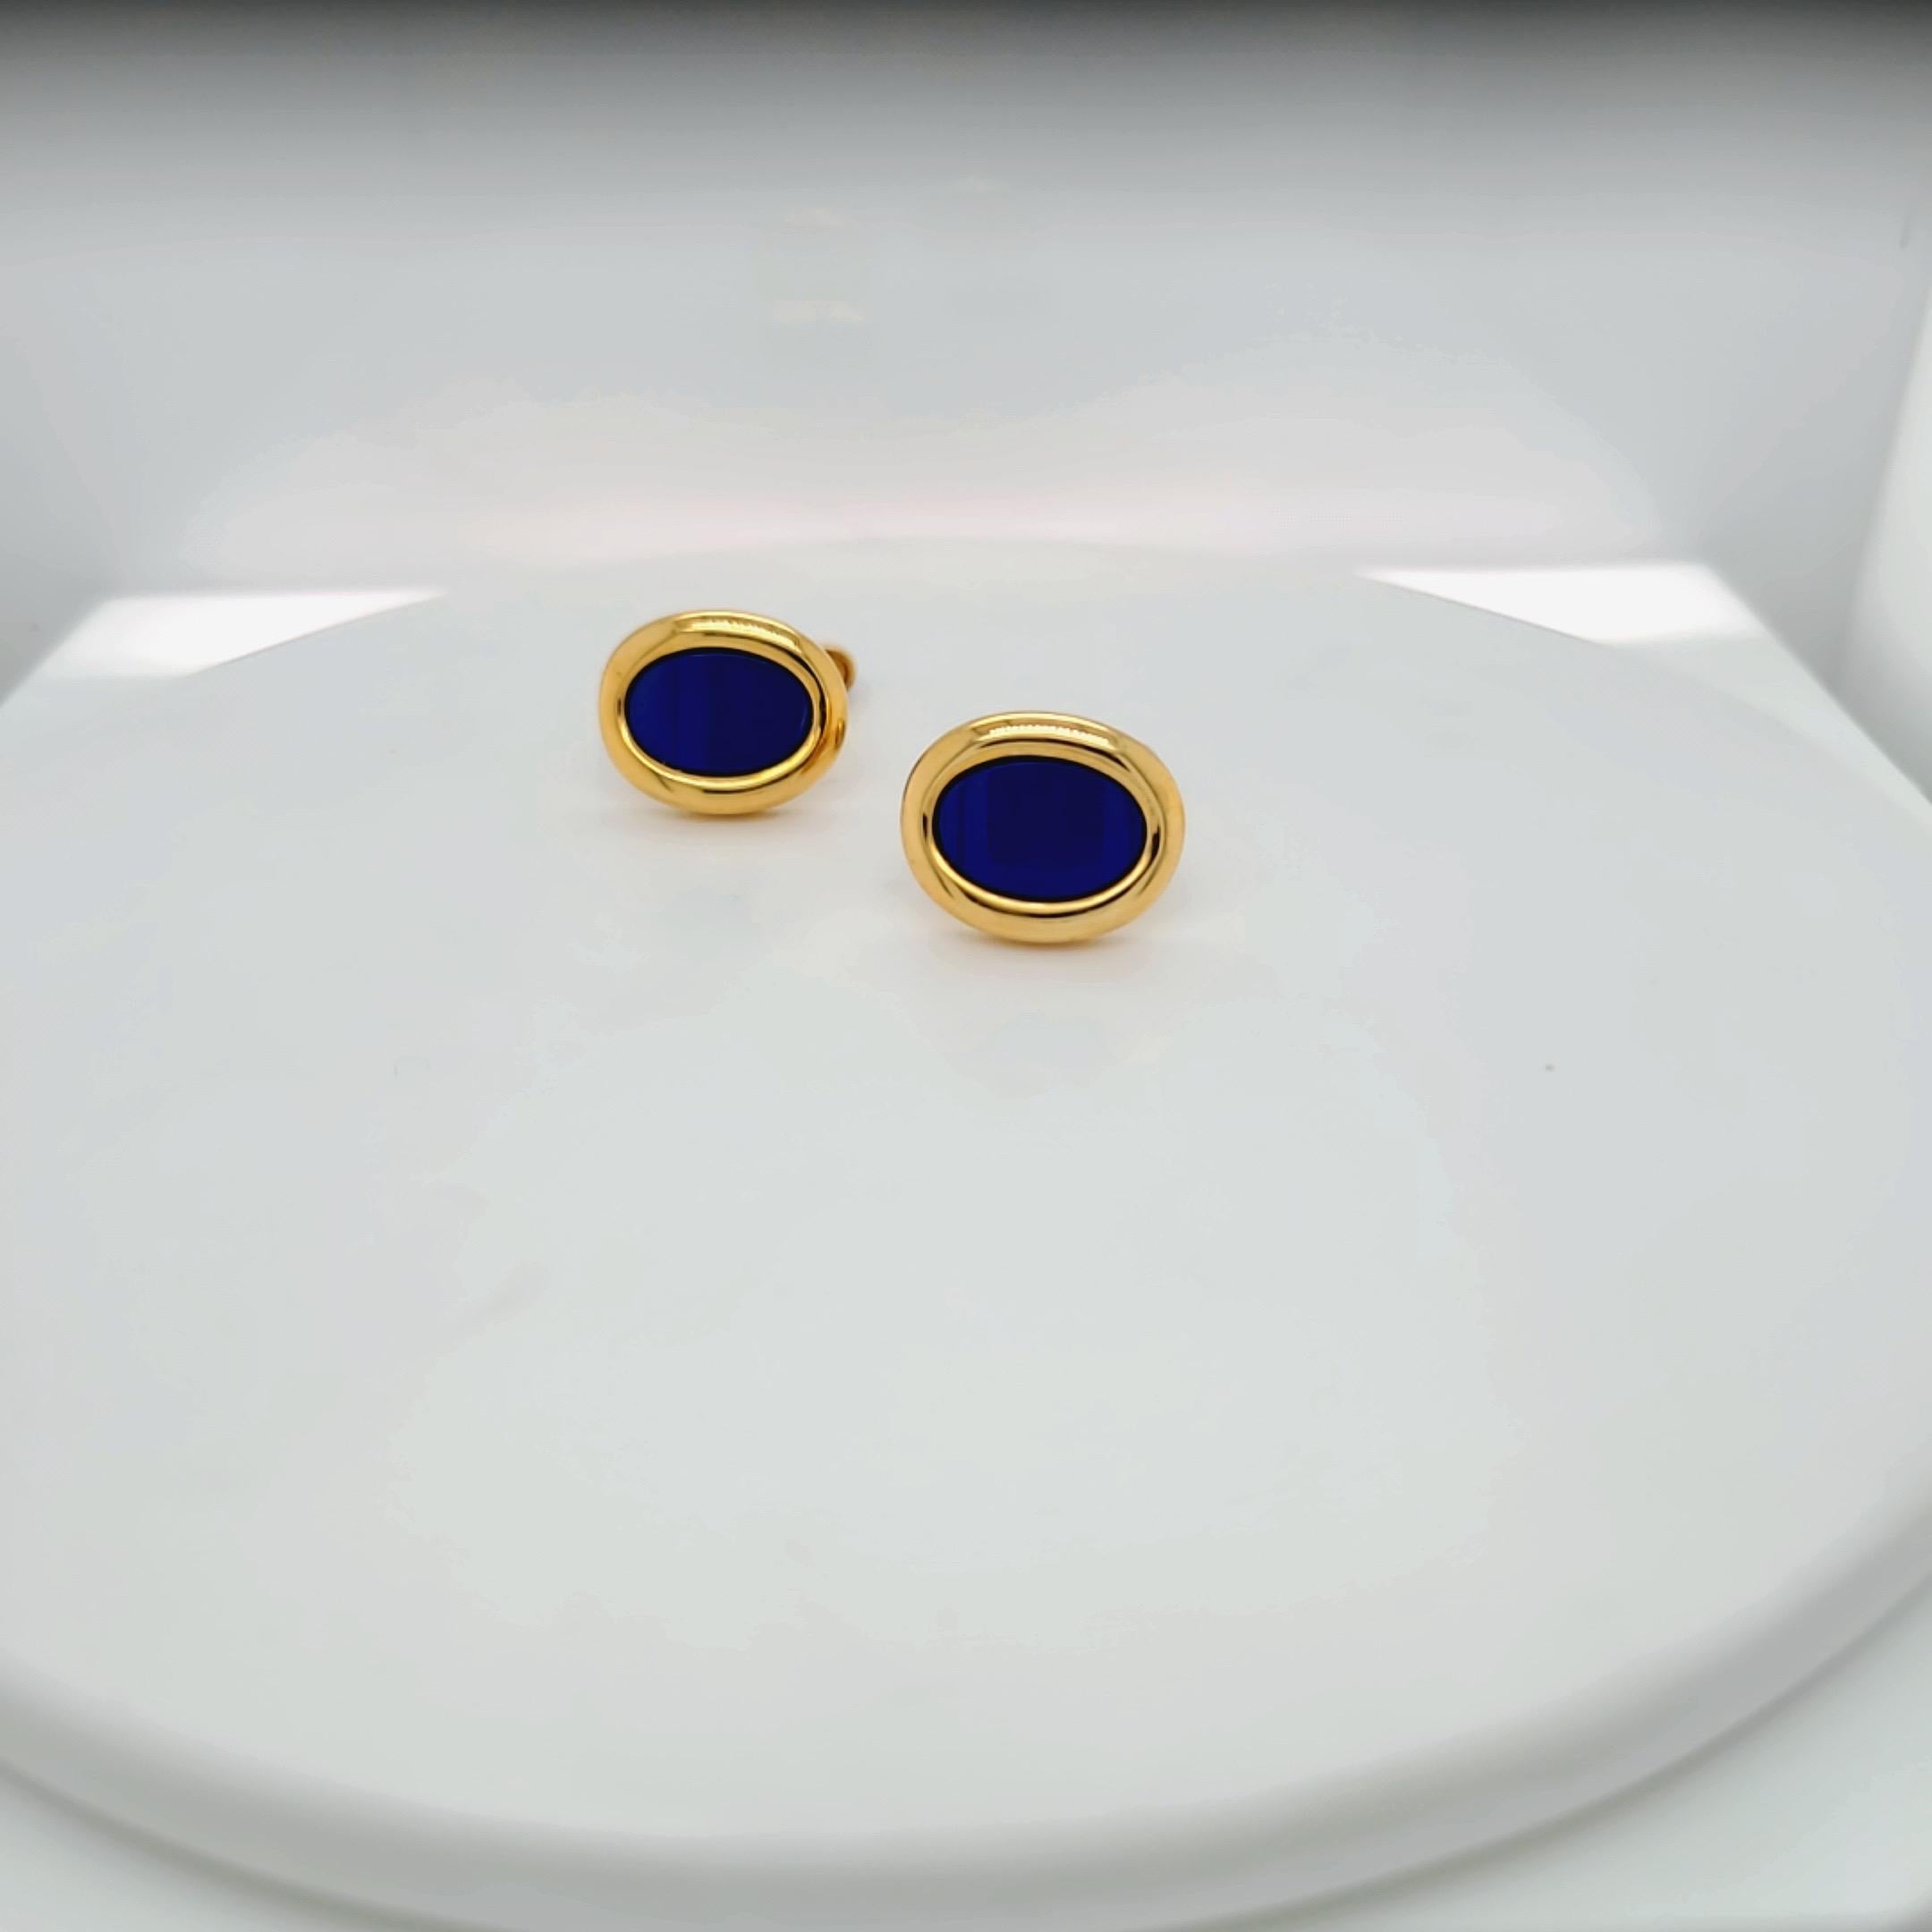 Contemporary George Gero 18 Karat Yellow Gold Oval Cufflinks with Lapis and Onyx For Sale